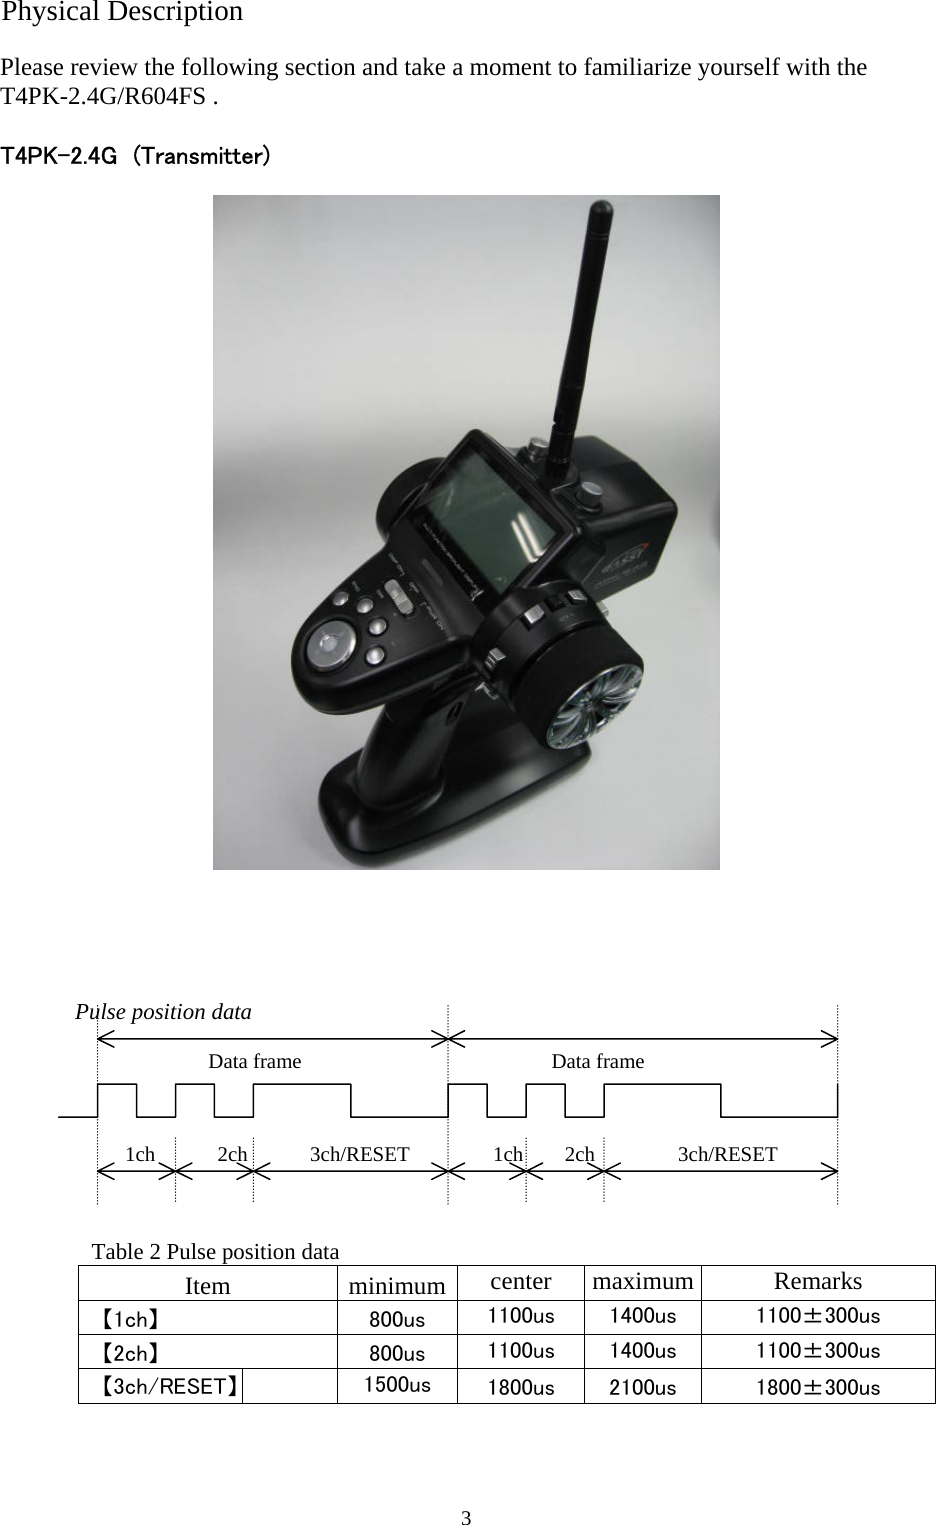 3 Physical Description Please review the following section and take a moment to familiarize yourself with the T4PK-2.4G/R604FS .  T4PK-2.4G  (Transmitter)       Pulse position data            Data frame            Data frame                       1ch   2ch   3ch/RESET    1ch  2ch    3ch/RESET                Table 2 Pulse position data Item minimum center maximum Remarks 【1ch】  800us  1100us  1400us  1100±300us 【2ch】  800us  1100us  1400us  1100±300us 【3ch/RESET】    1500us  1800us  2100us  1800±300us   